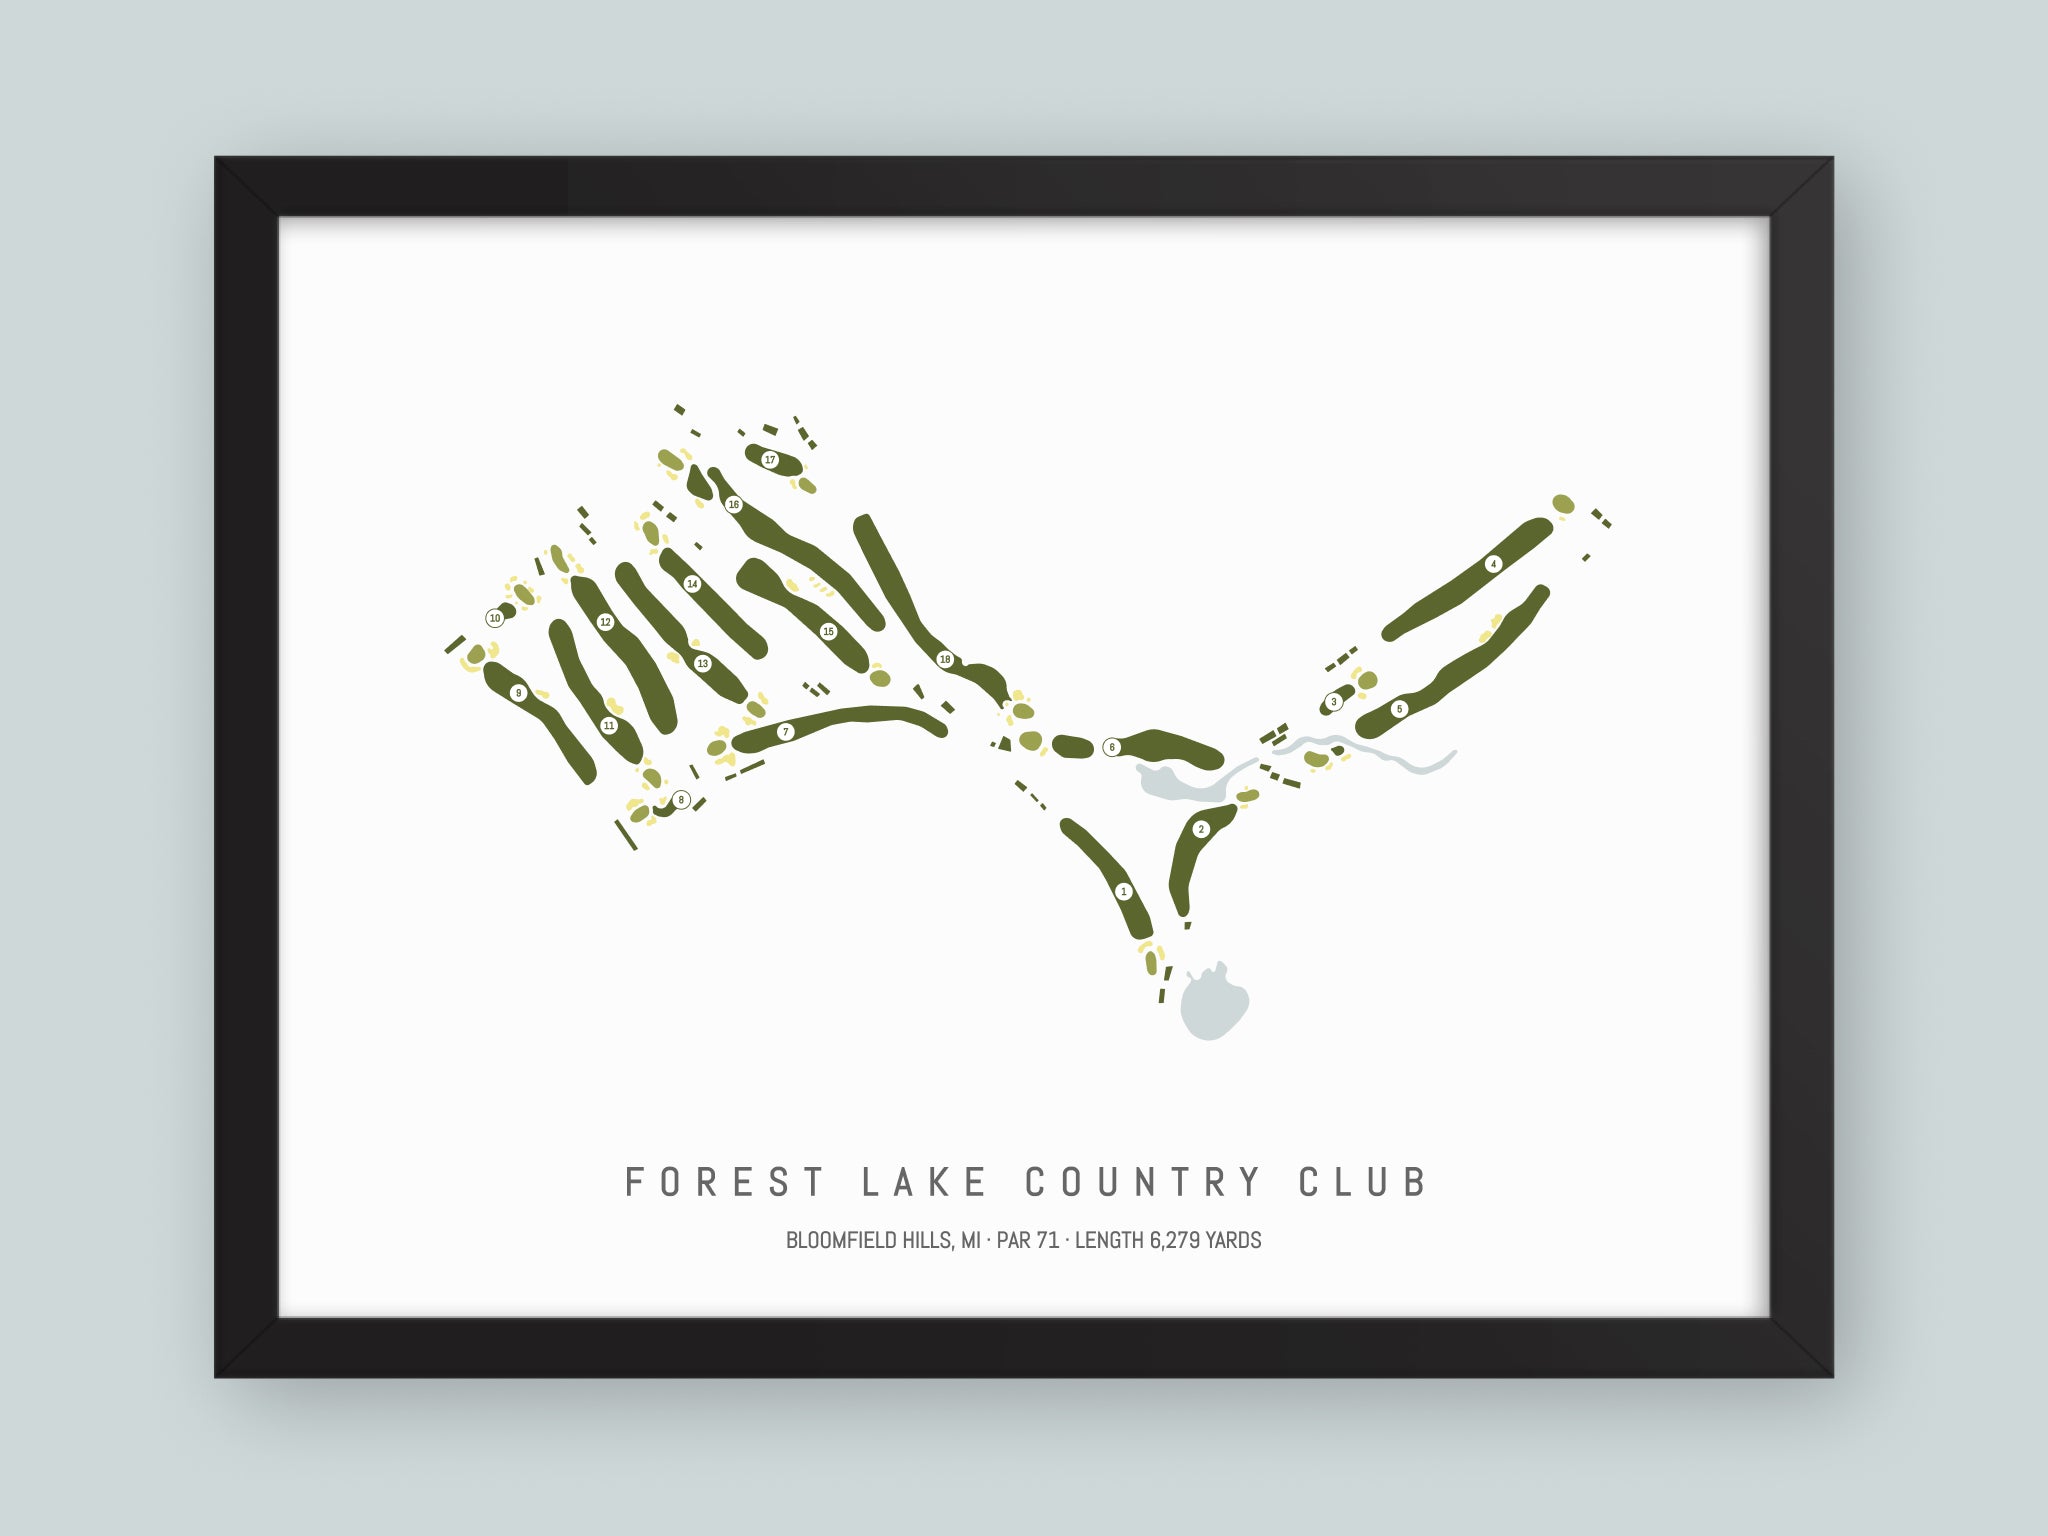 Forest-Lake-Country-Club-MI--Black-Frame-24x18-With-Hole-Numbers